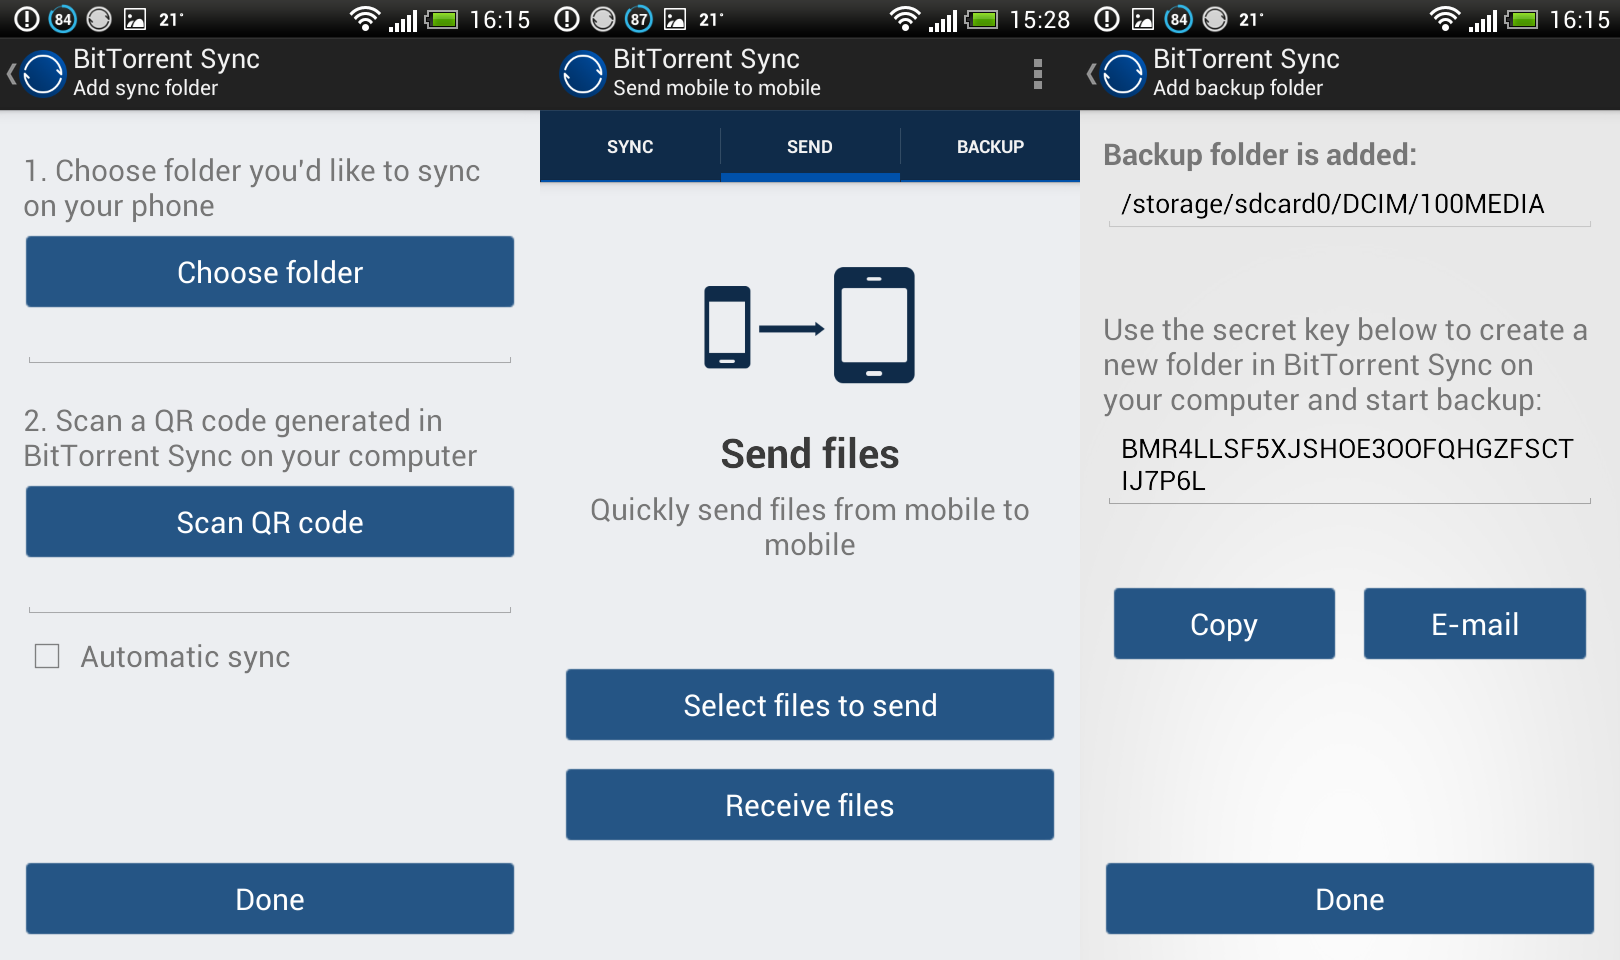 ... Sync beta with versioning, one-way syncing, and an Android app